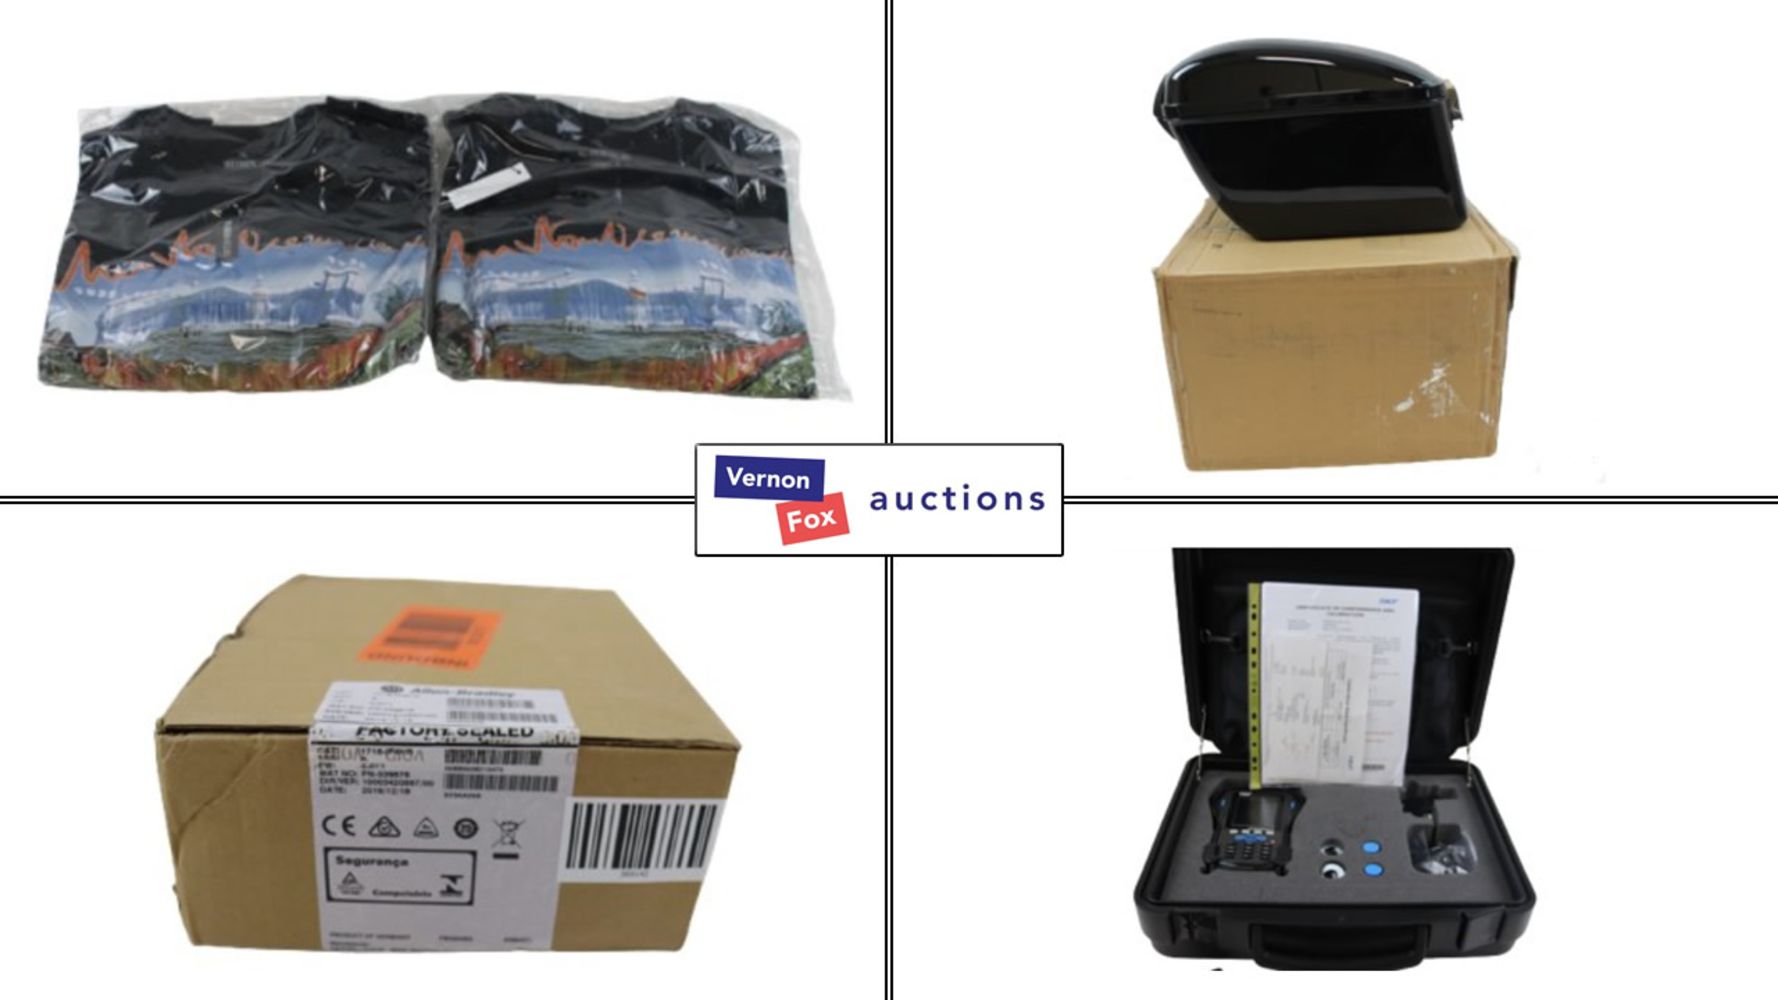 TIMED ONLINE AUCTION: A wide choice of Industrial, Clothing, Homewares and Arts & Crafts Items. FREE UK DELIVERY!